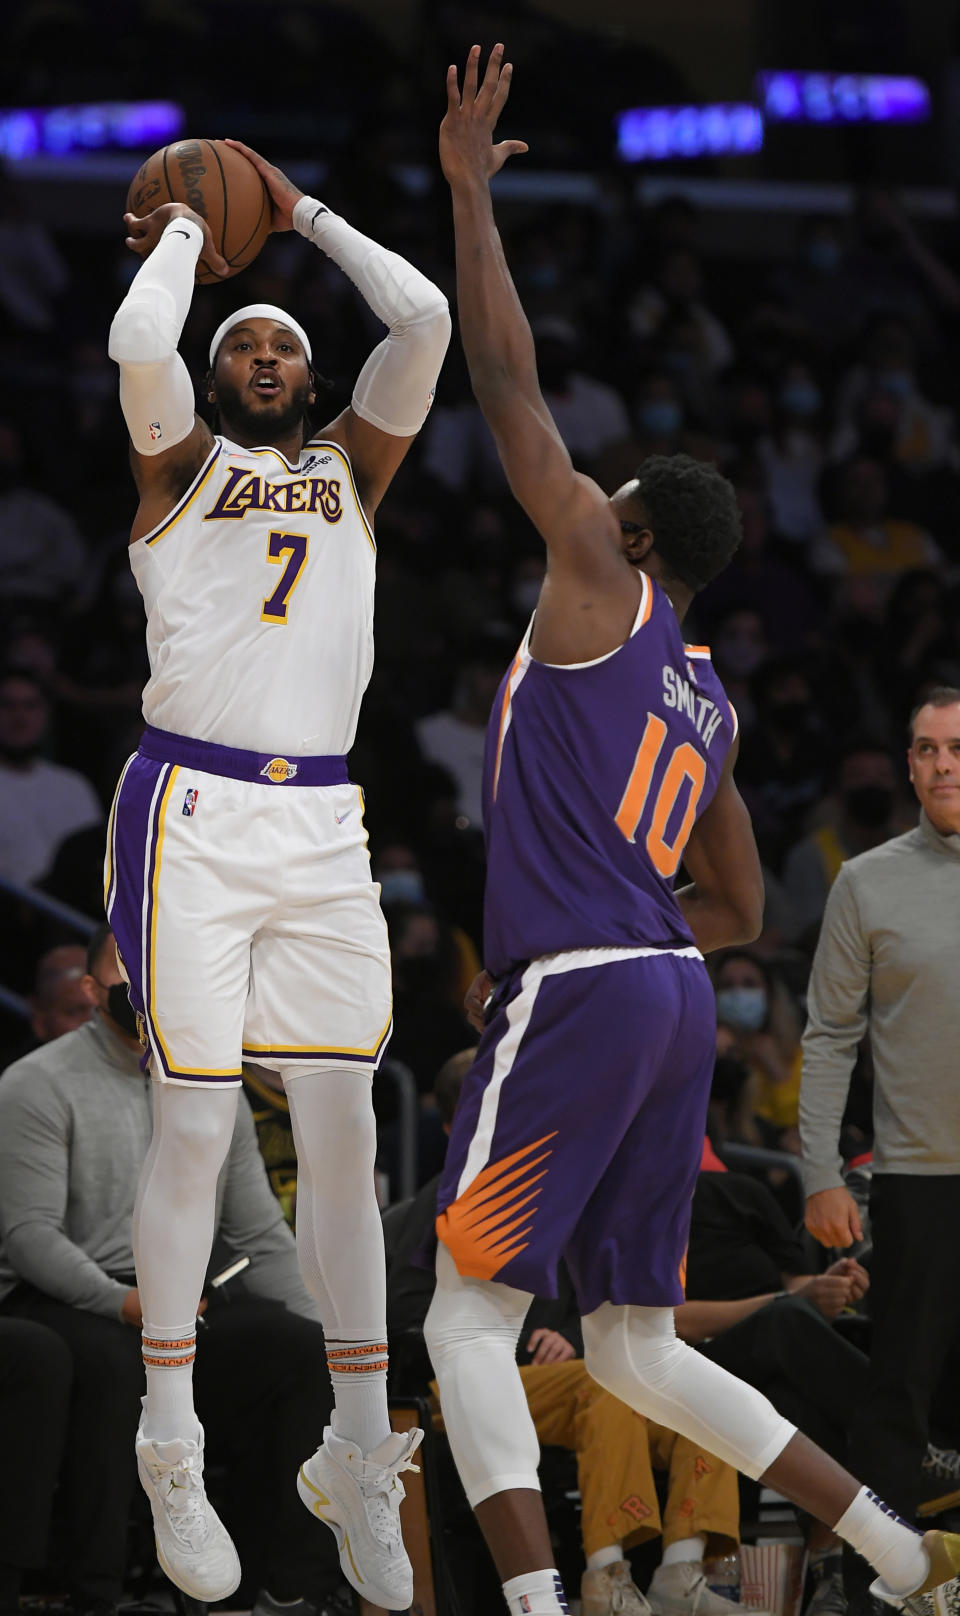 Los Angeles Lakers forward Carmelo Anthony (7) shoots the ball over Phoenix Suns forward Jalen Smith (10) in the second half of a preseason NBA basketball game in Los Angeles, Sunday, Oct. 10, 2021. (AP Photo/John McCoy)